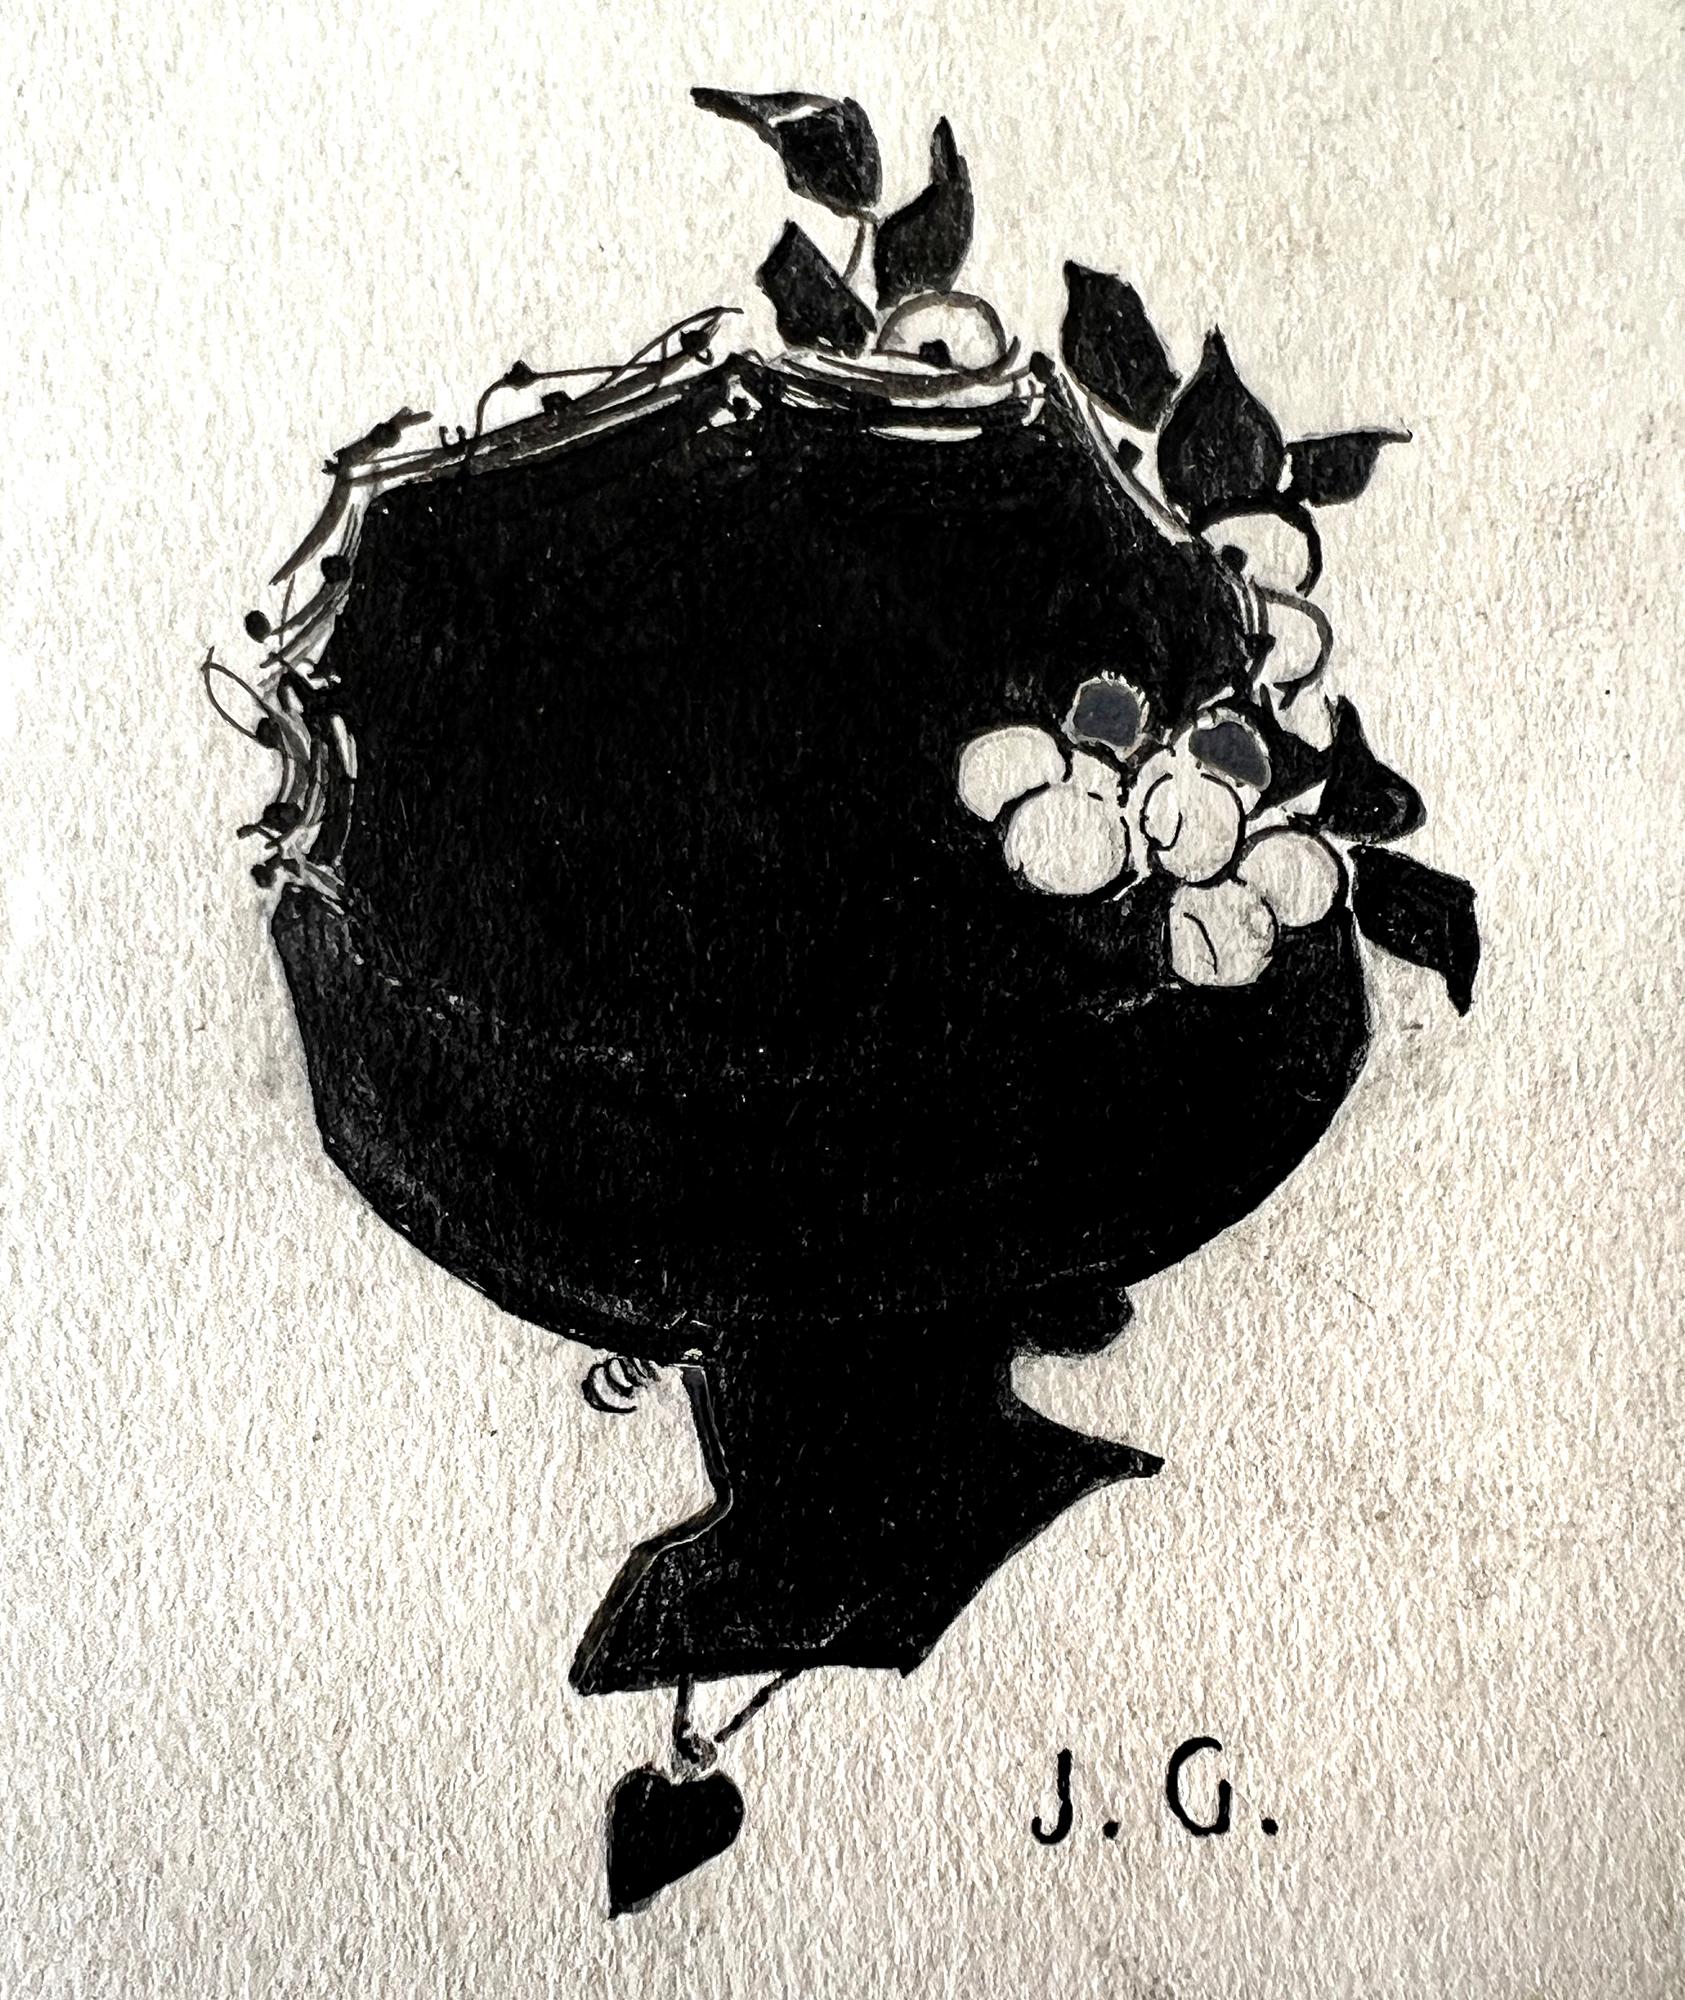 
115 years after they were created, one can view these silhouettes differently than the artist’s intent. 
After all, the genesis of this work was an editorial illustration for Life Magazine to showcase elaborate women’s hats.
They were done for a